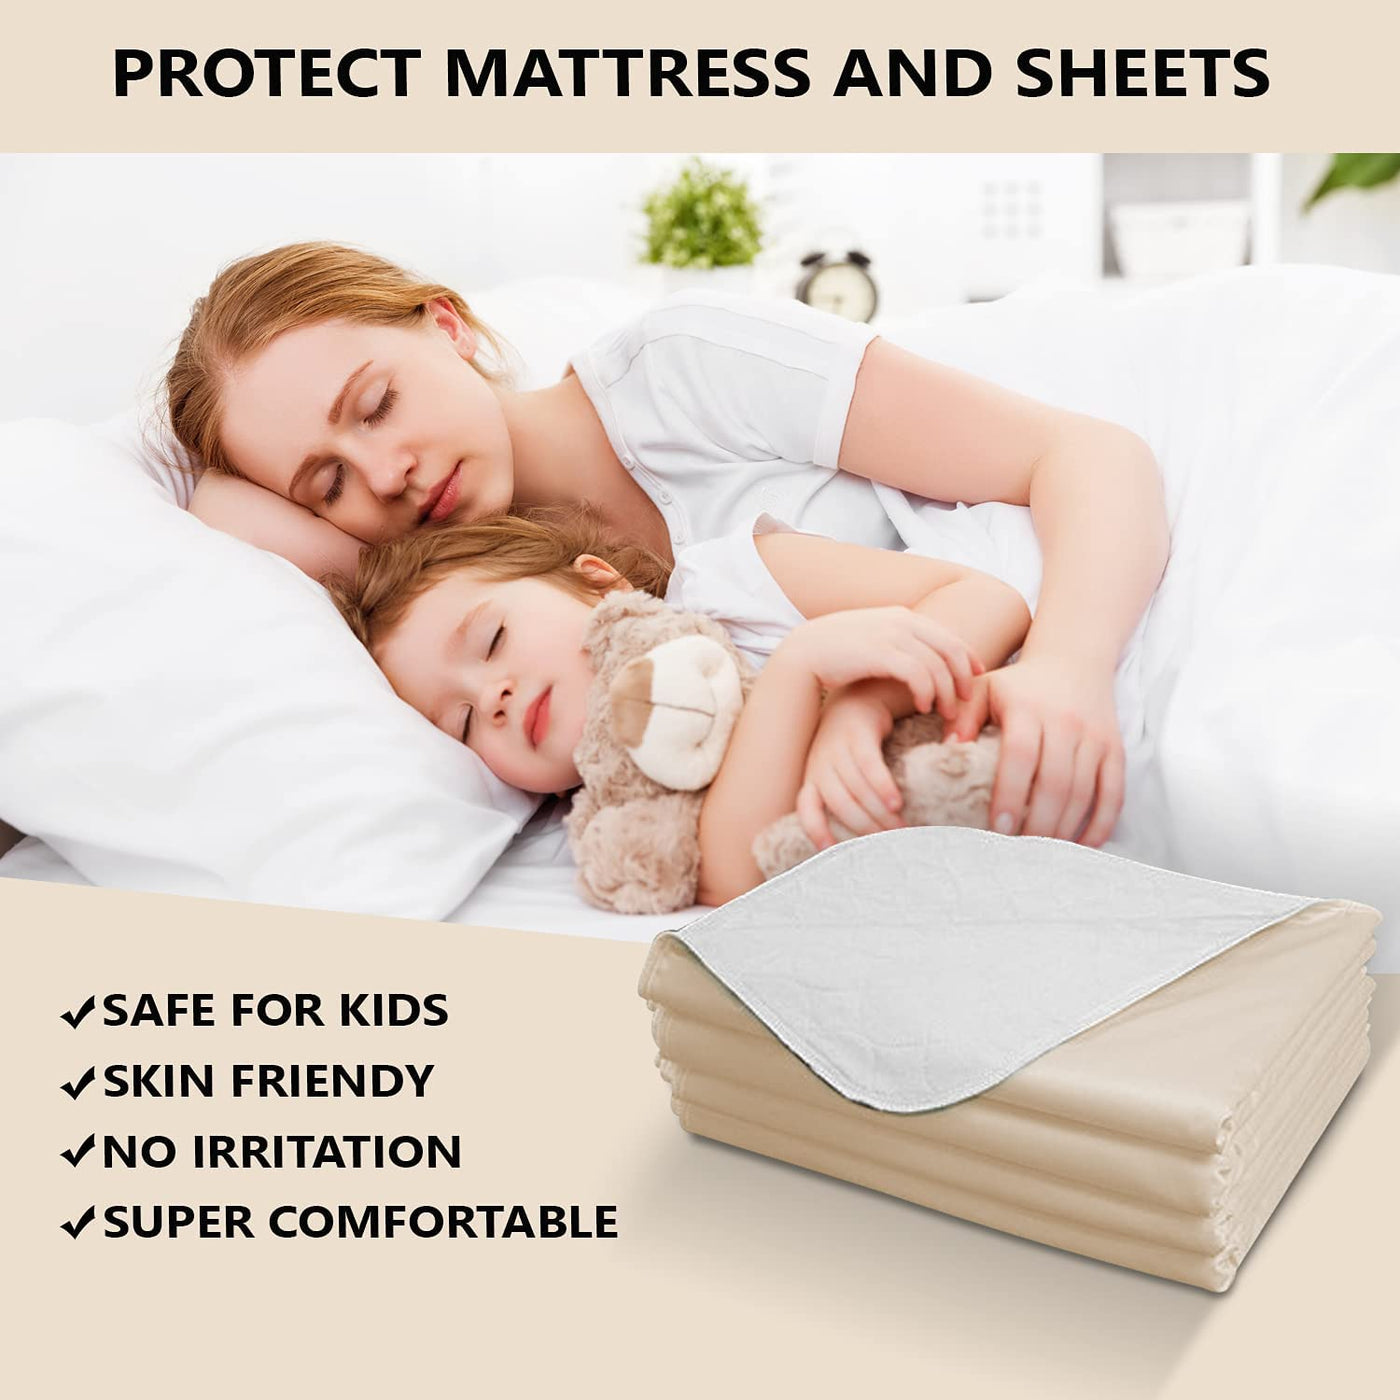 Reusable/Washable Waterproof Bed Pad for Children or Adults (Tan)